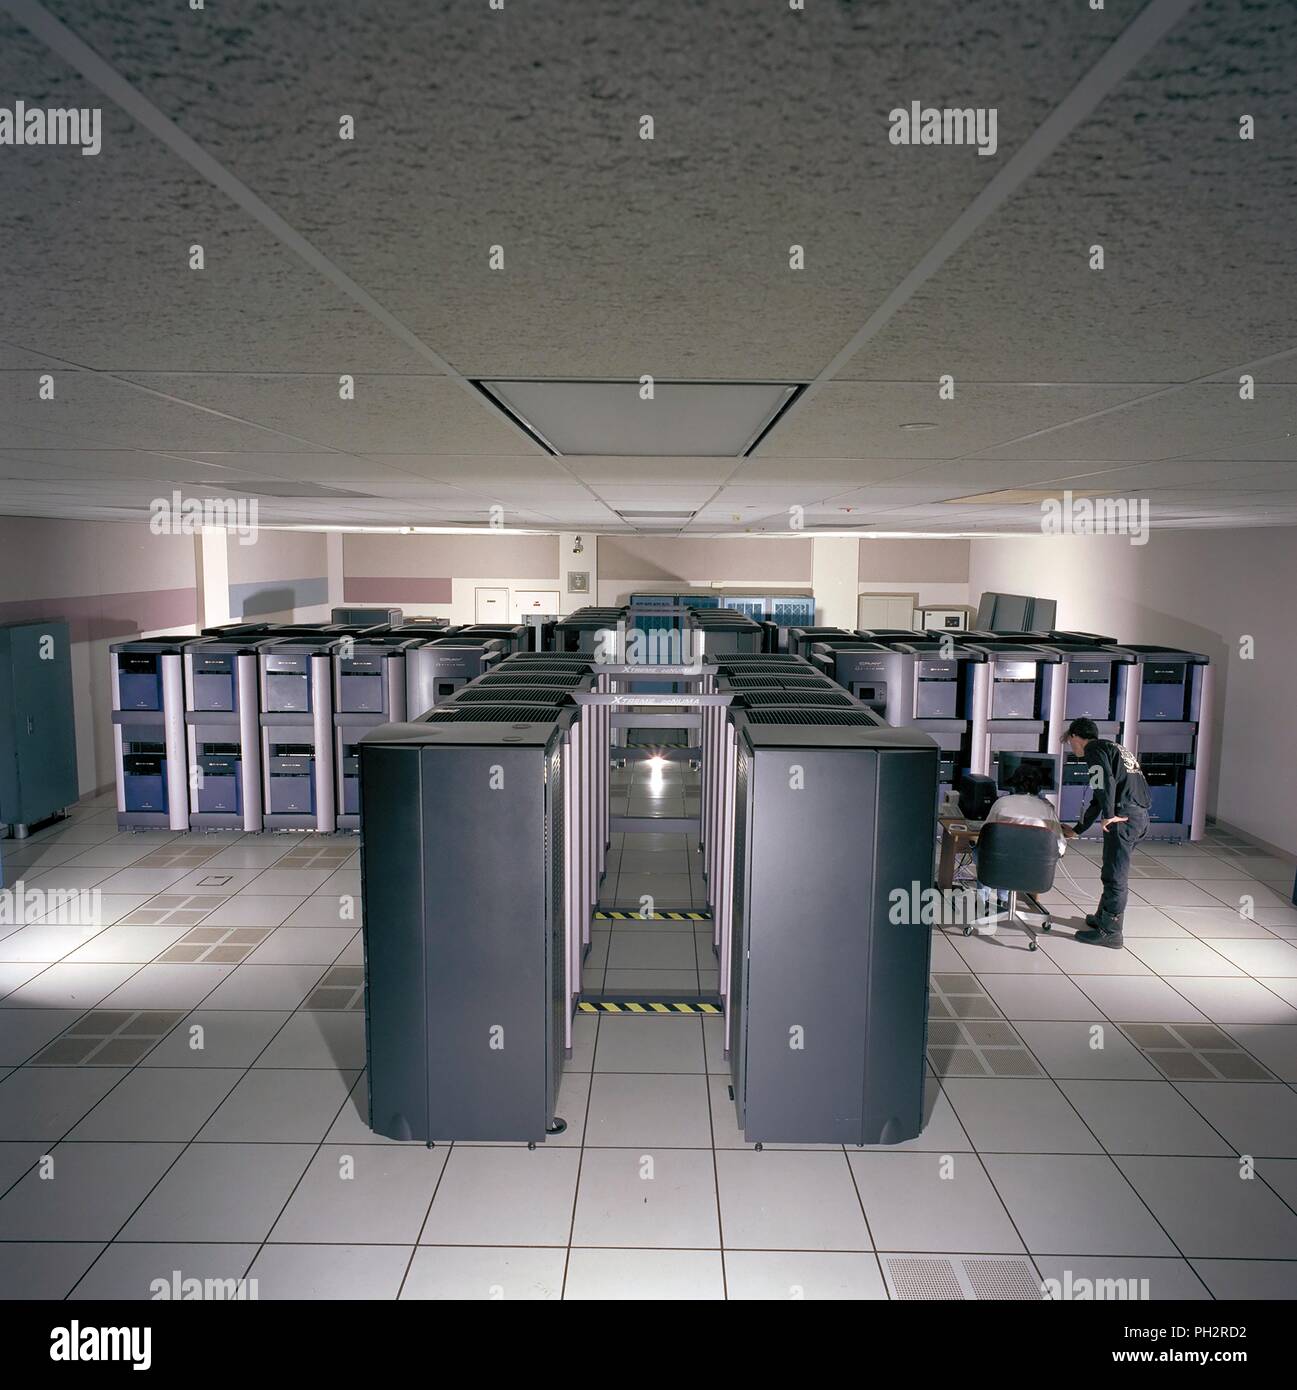 High-angle view of computer room with NAS Origin 2000 mainframe computer system LOMAX station, with Karl Schilke and Rita Williams visible using the computer, Silicon Valley, Mountain View, California, September 30, 1999. Courtesy Internet Archive/NASA Ames. () Stock Photo